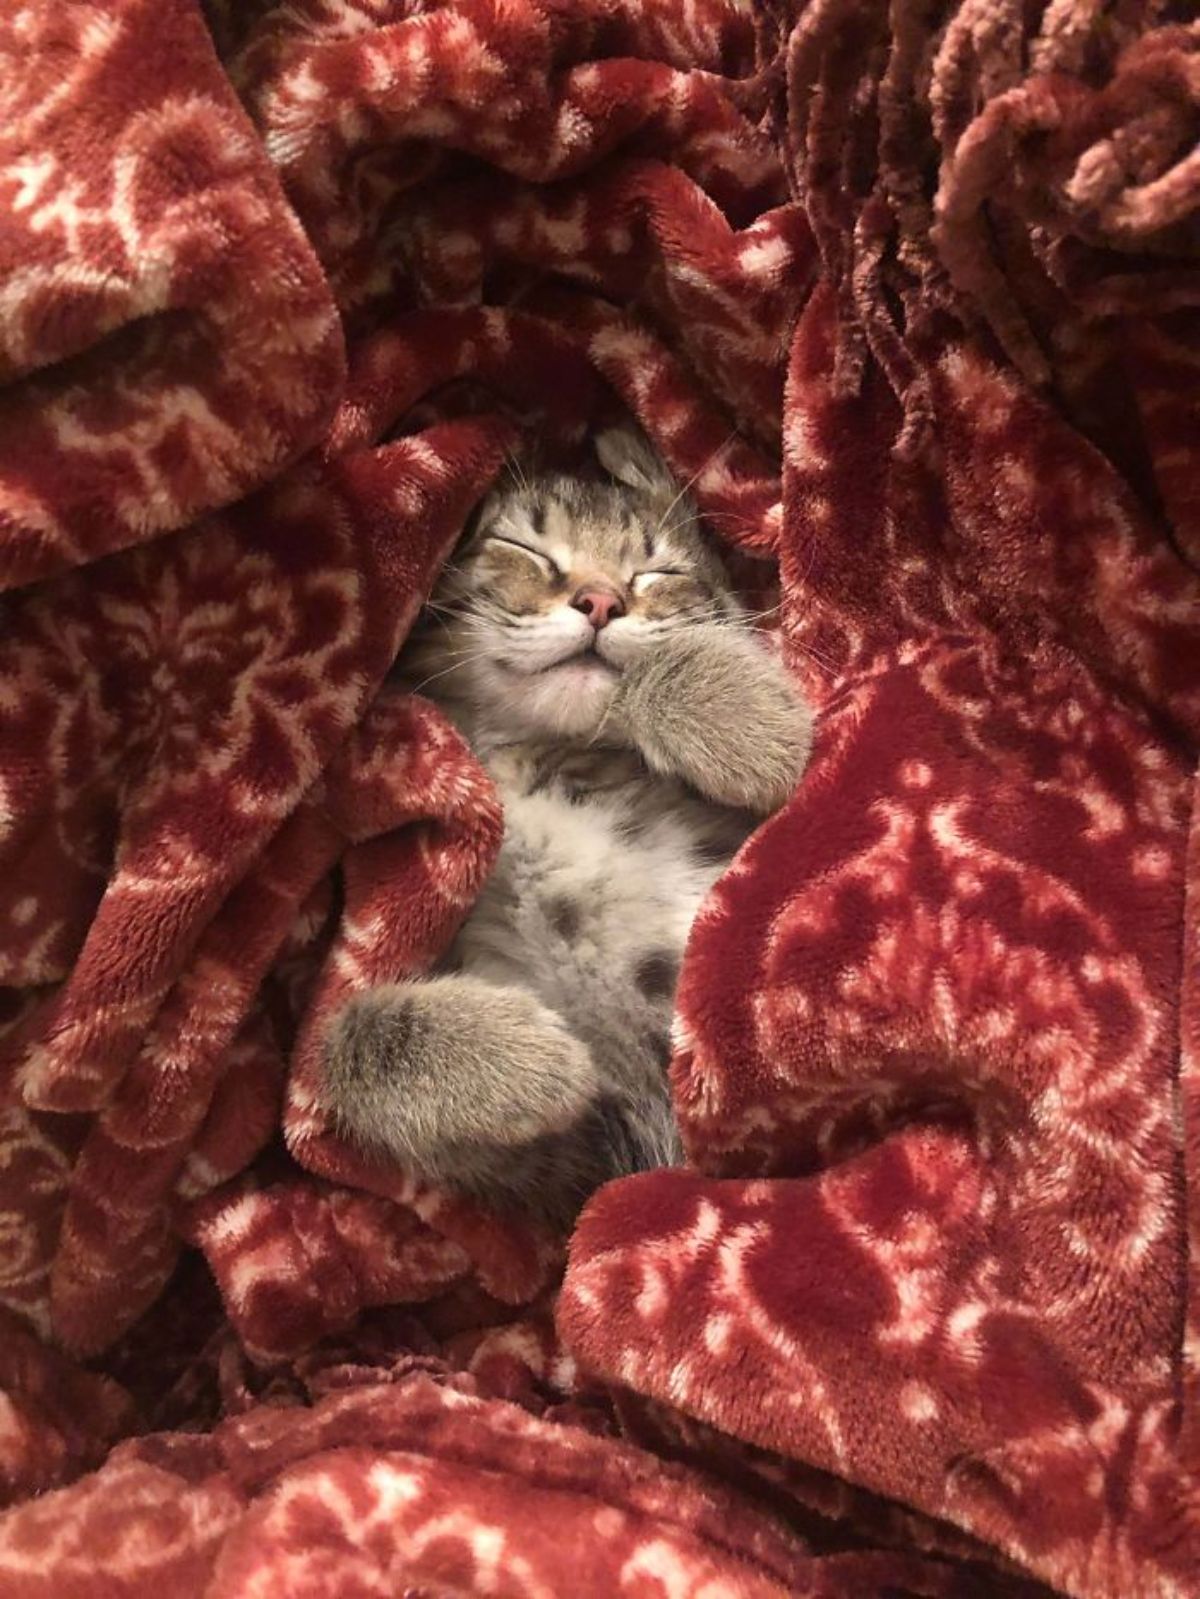 grey and white kitten laying belly up and sleeping surrounded by a red and white patterned blanket